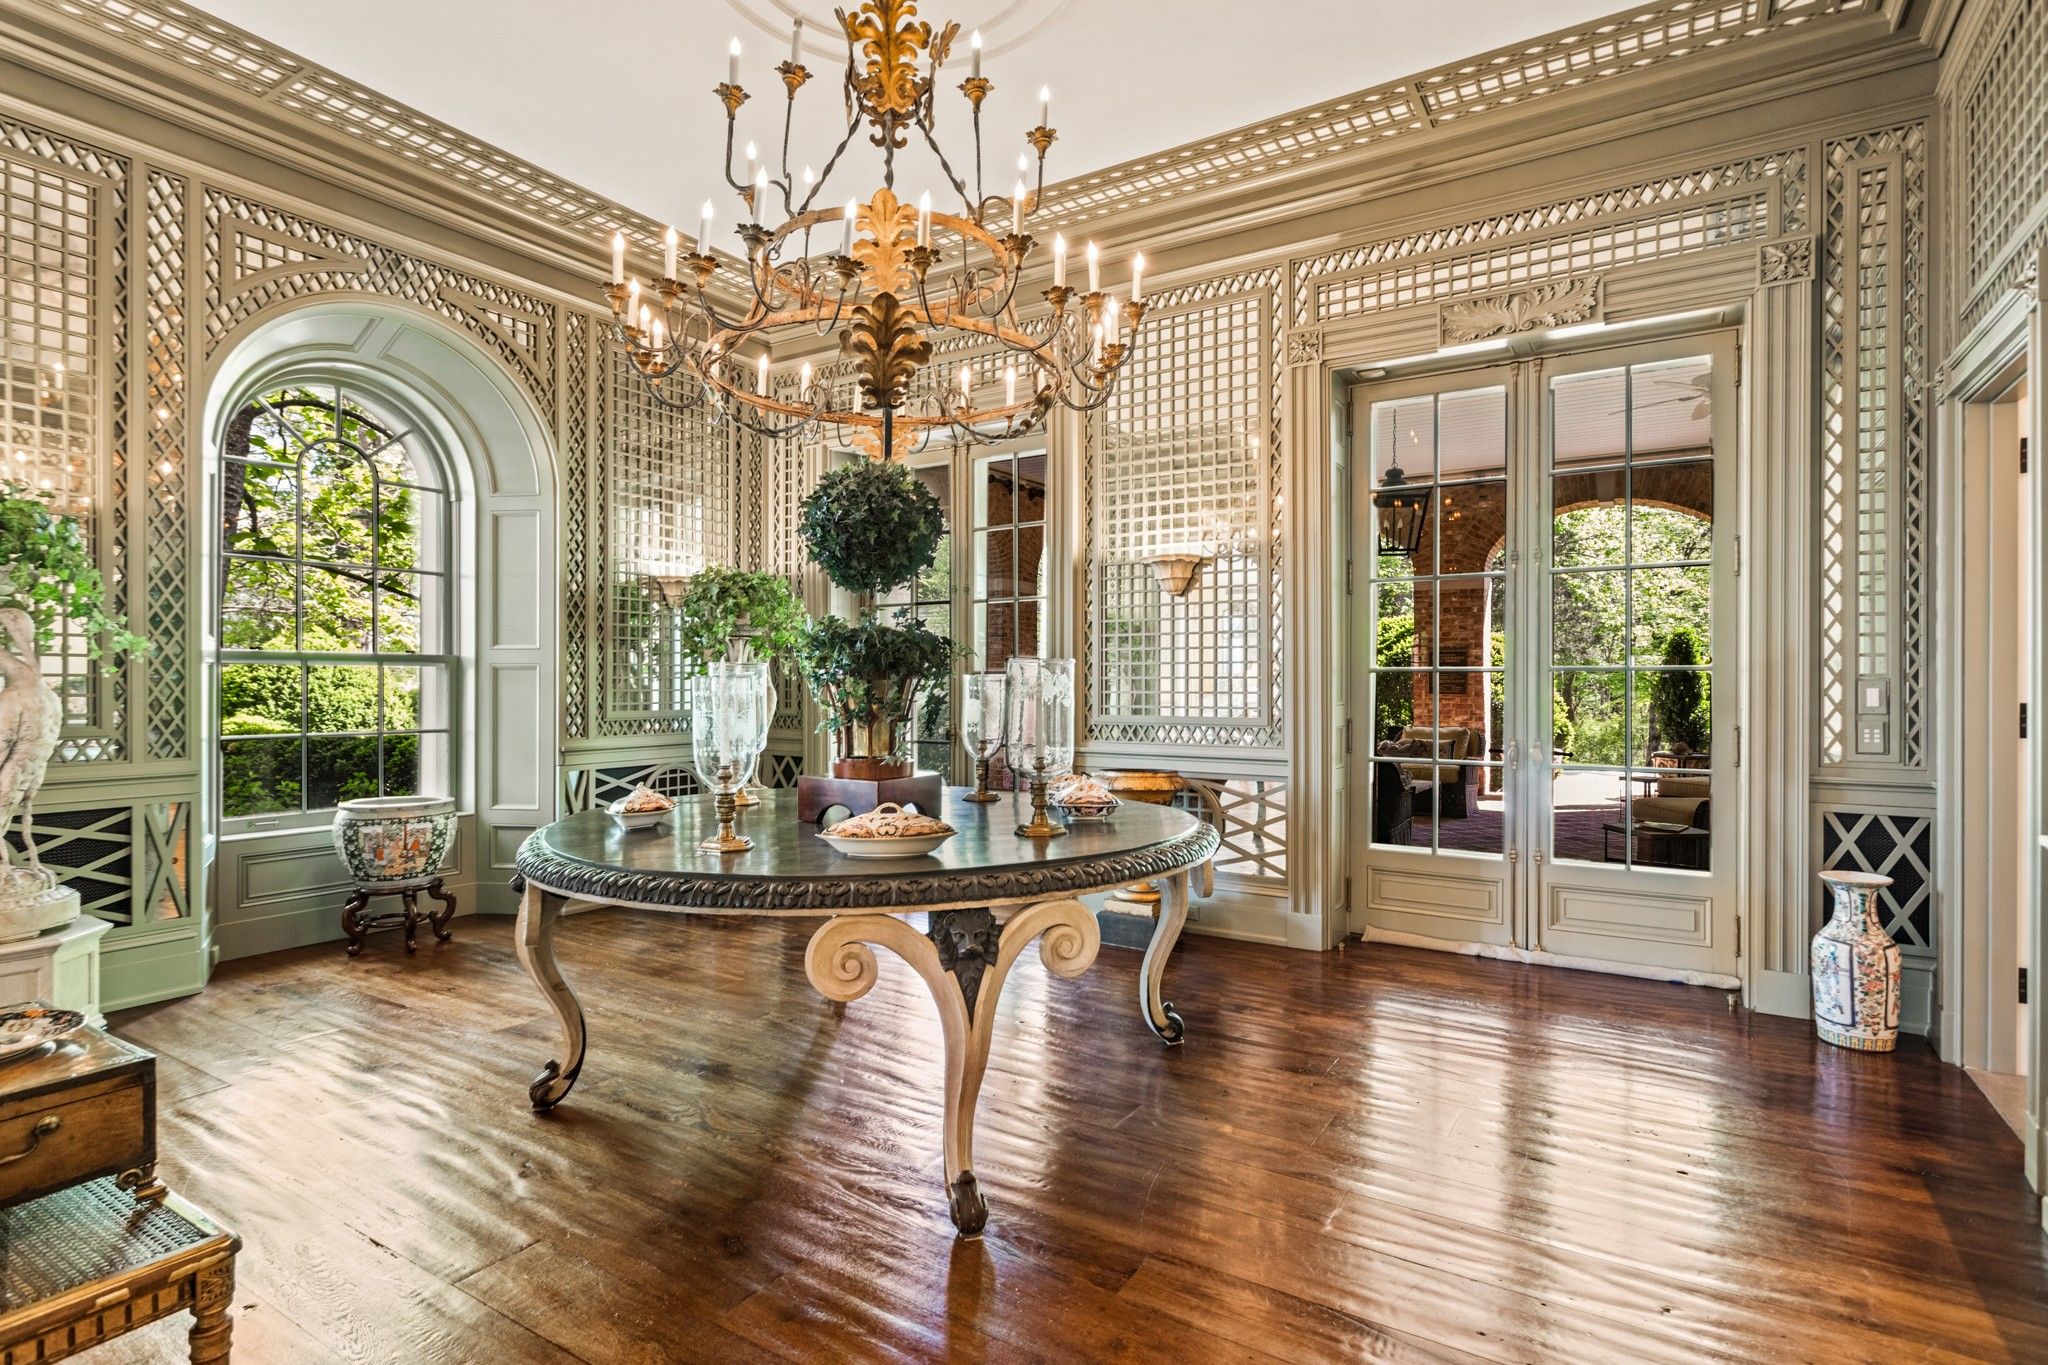 Nashville's most expensive home, listed at $50M